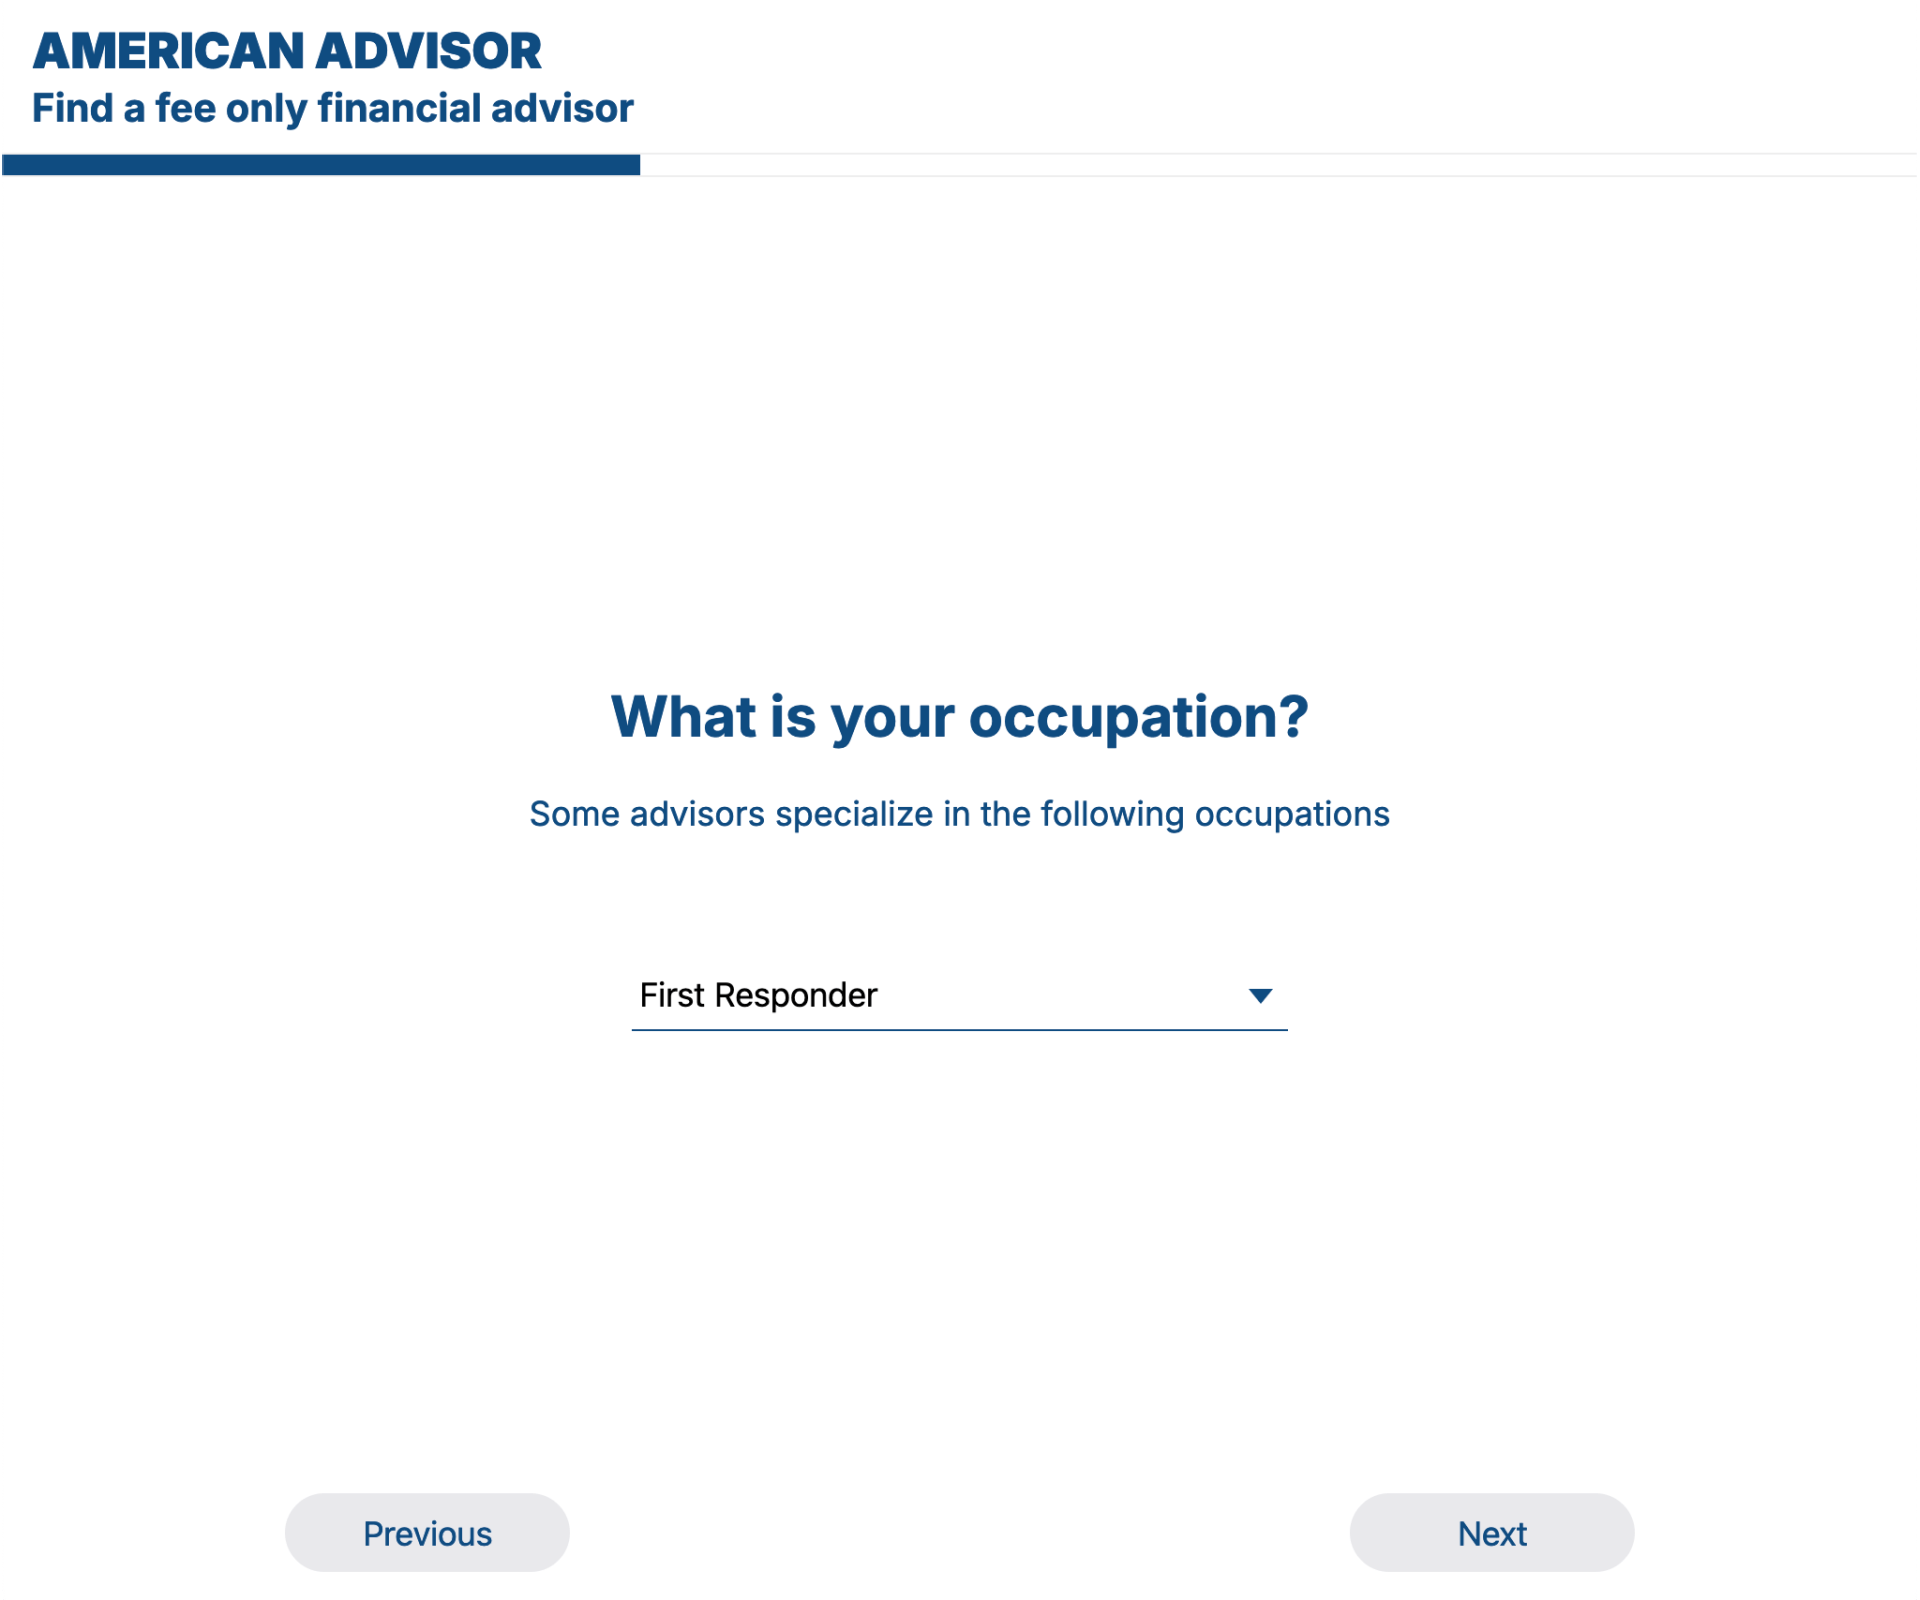 questionnaire asks: What is your occupation? Some advisors specialize in the following occupations... There is a select menu, showing a selected answer of 'First Responder'.